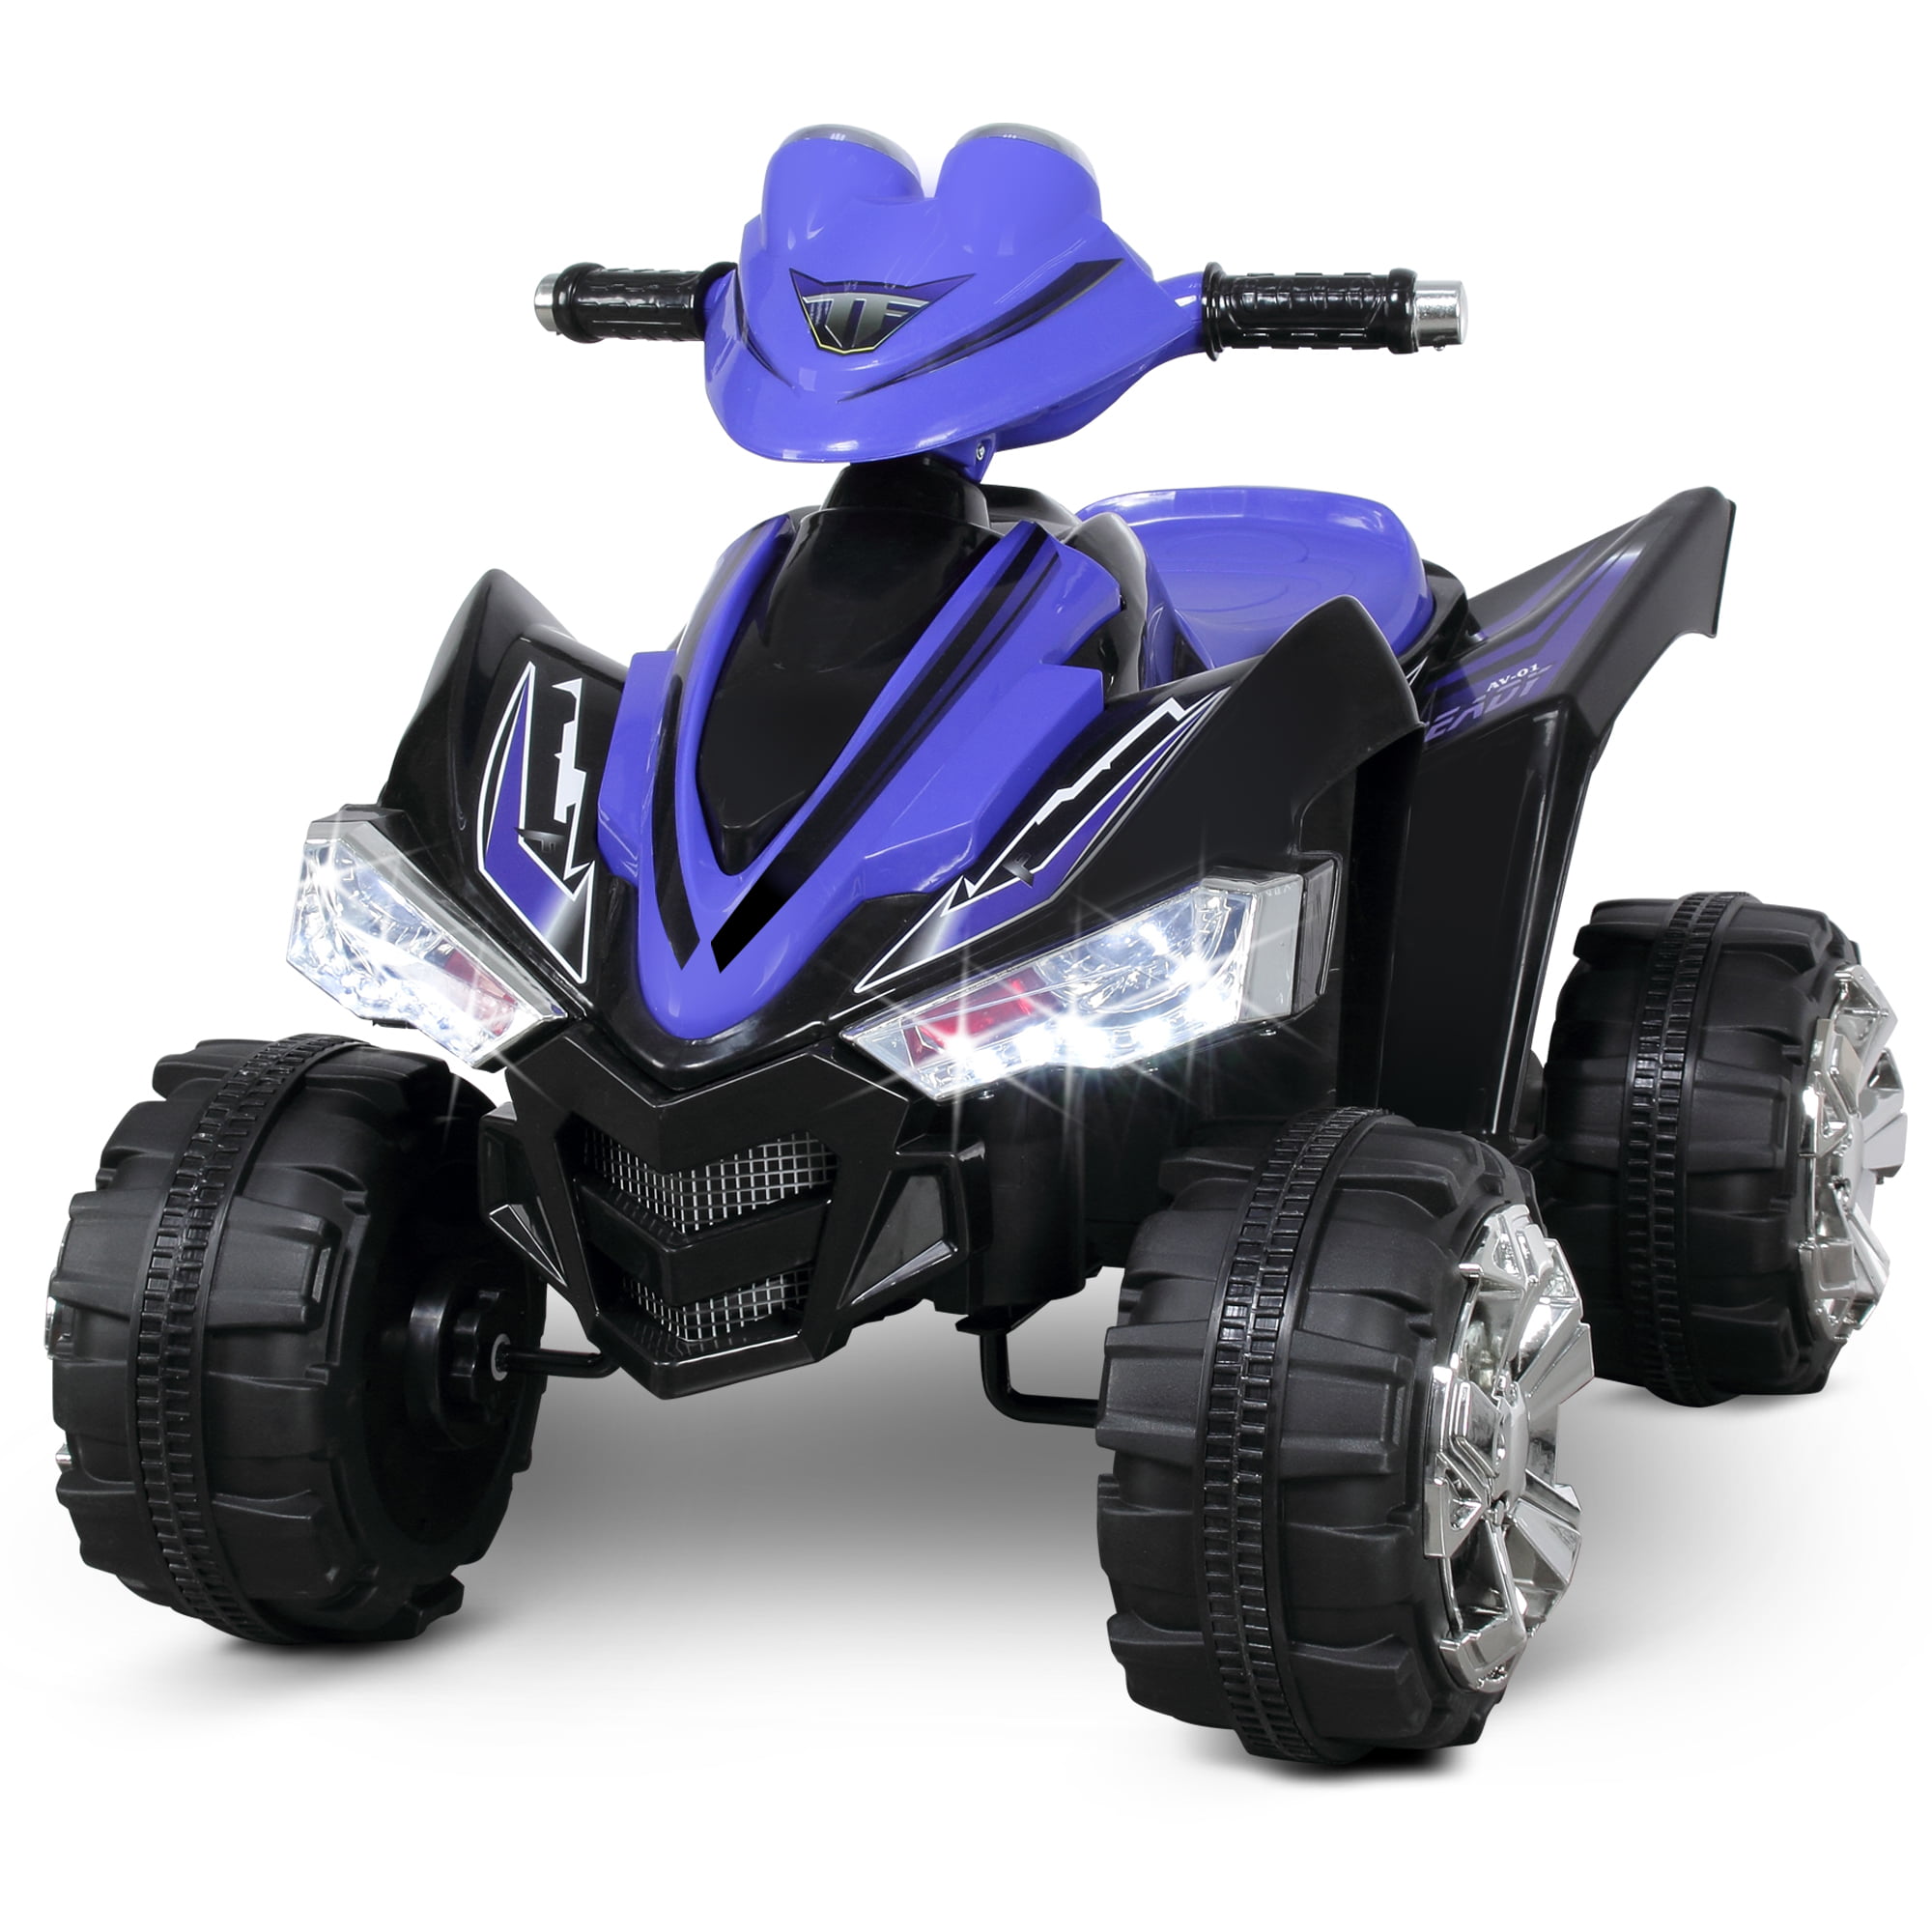 Kidzone Kids Ride On ATV MP3/USB Music Player LED Headlight 12V Battery Powered 45W Motor Electric Vehicle 2 Speed Quad Bike with Plastic Tires Four Wheels Suspension Blue 